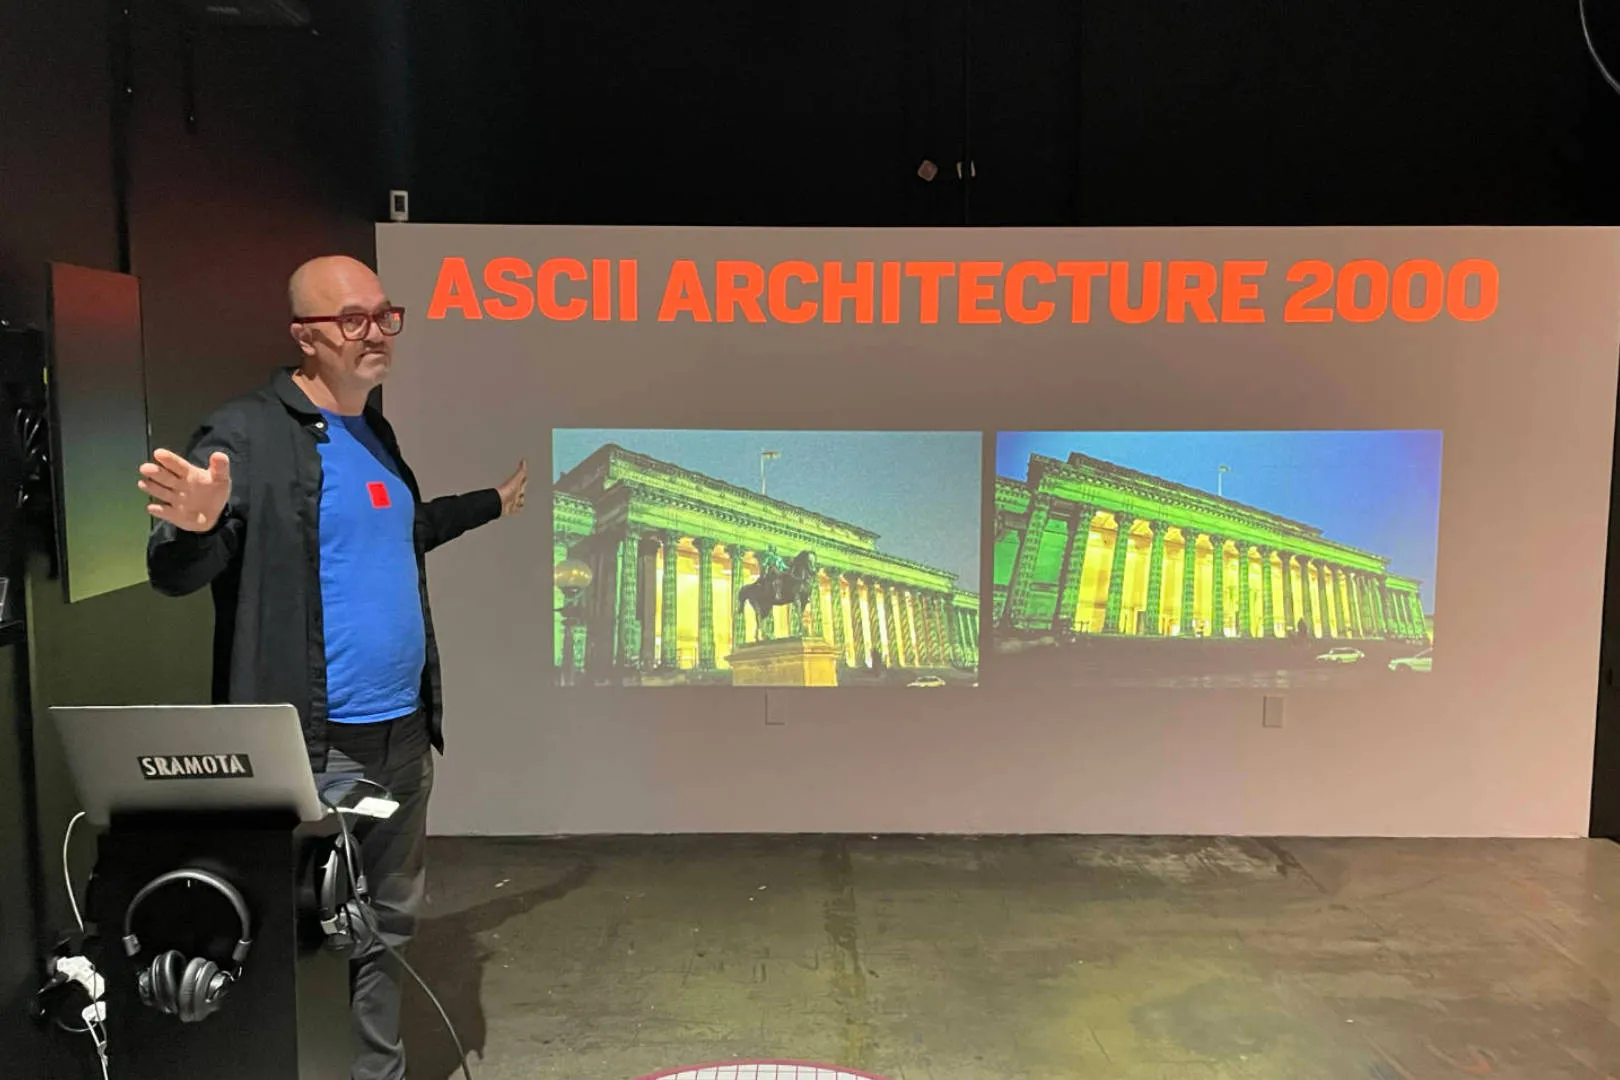 A man standing in front of a screen, doing a presentation on ASCII Architecture